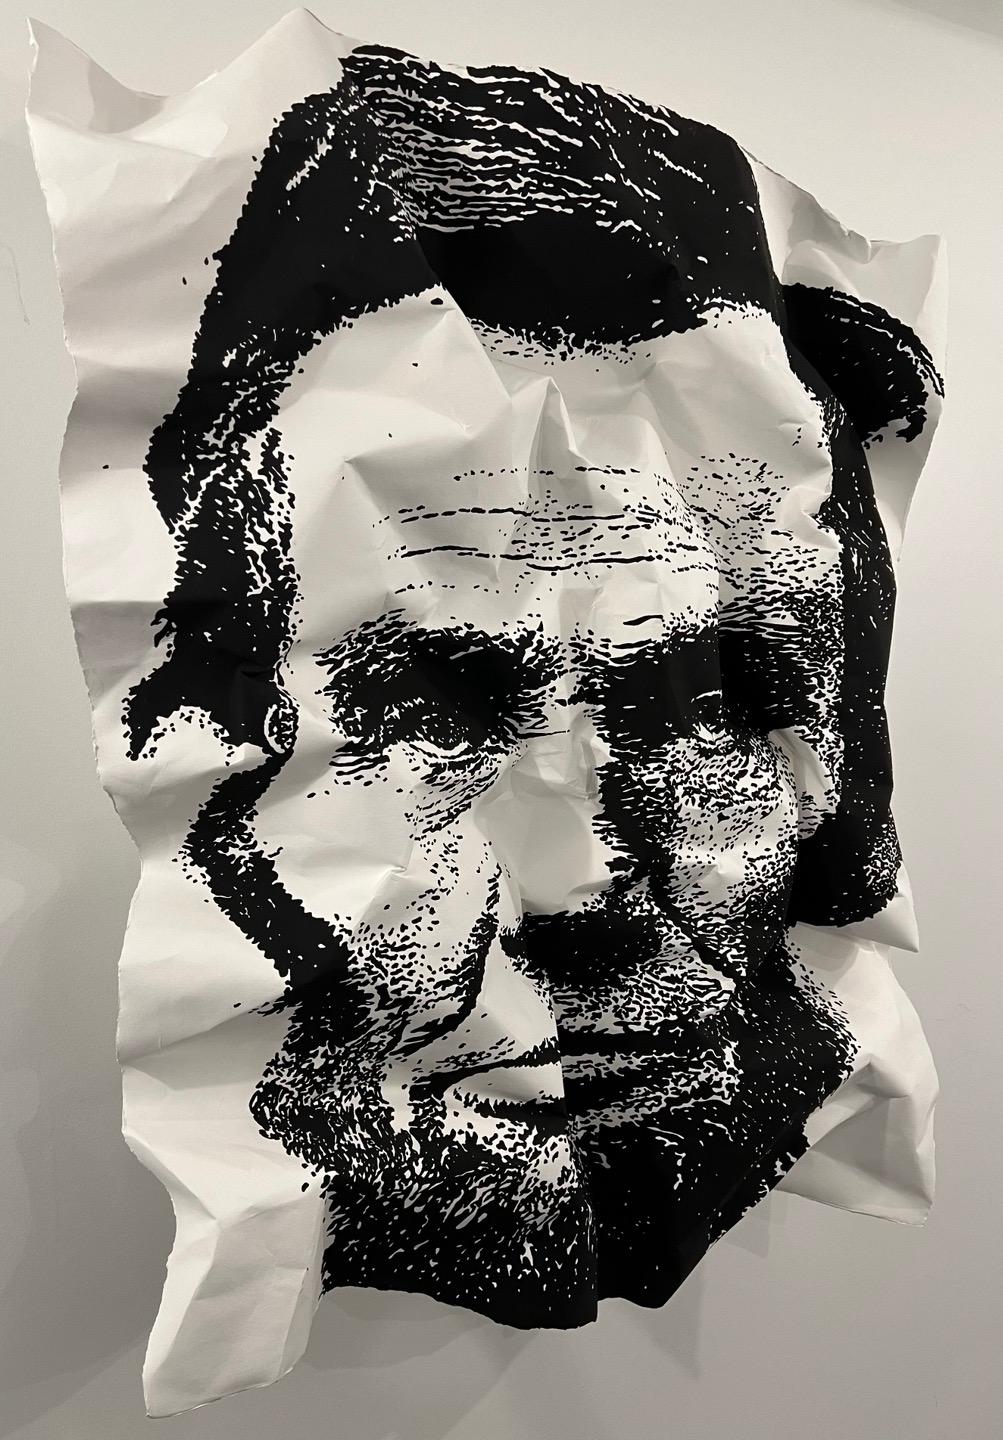 Lincoln - Kinetic Painting by Bret Reilly